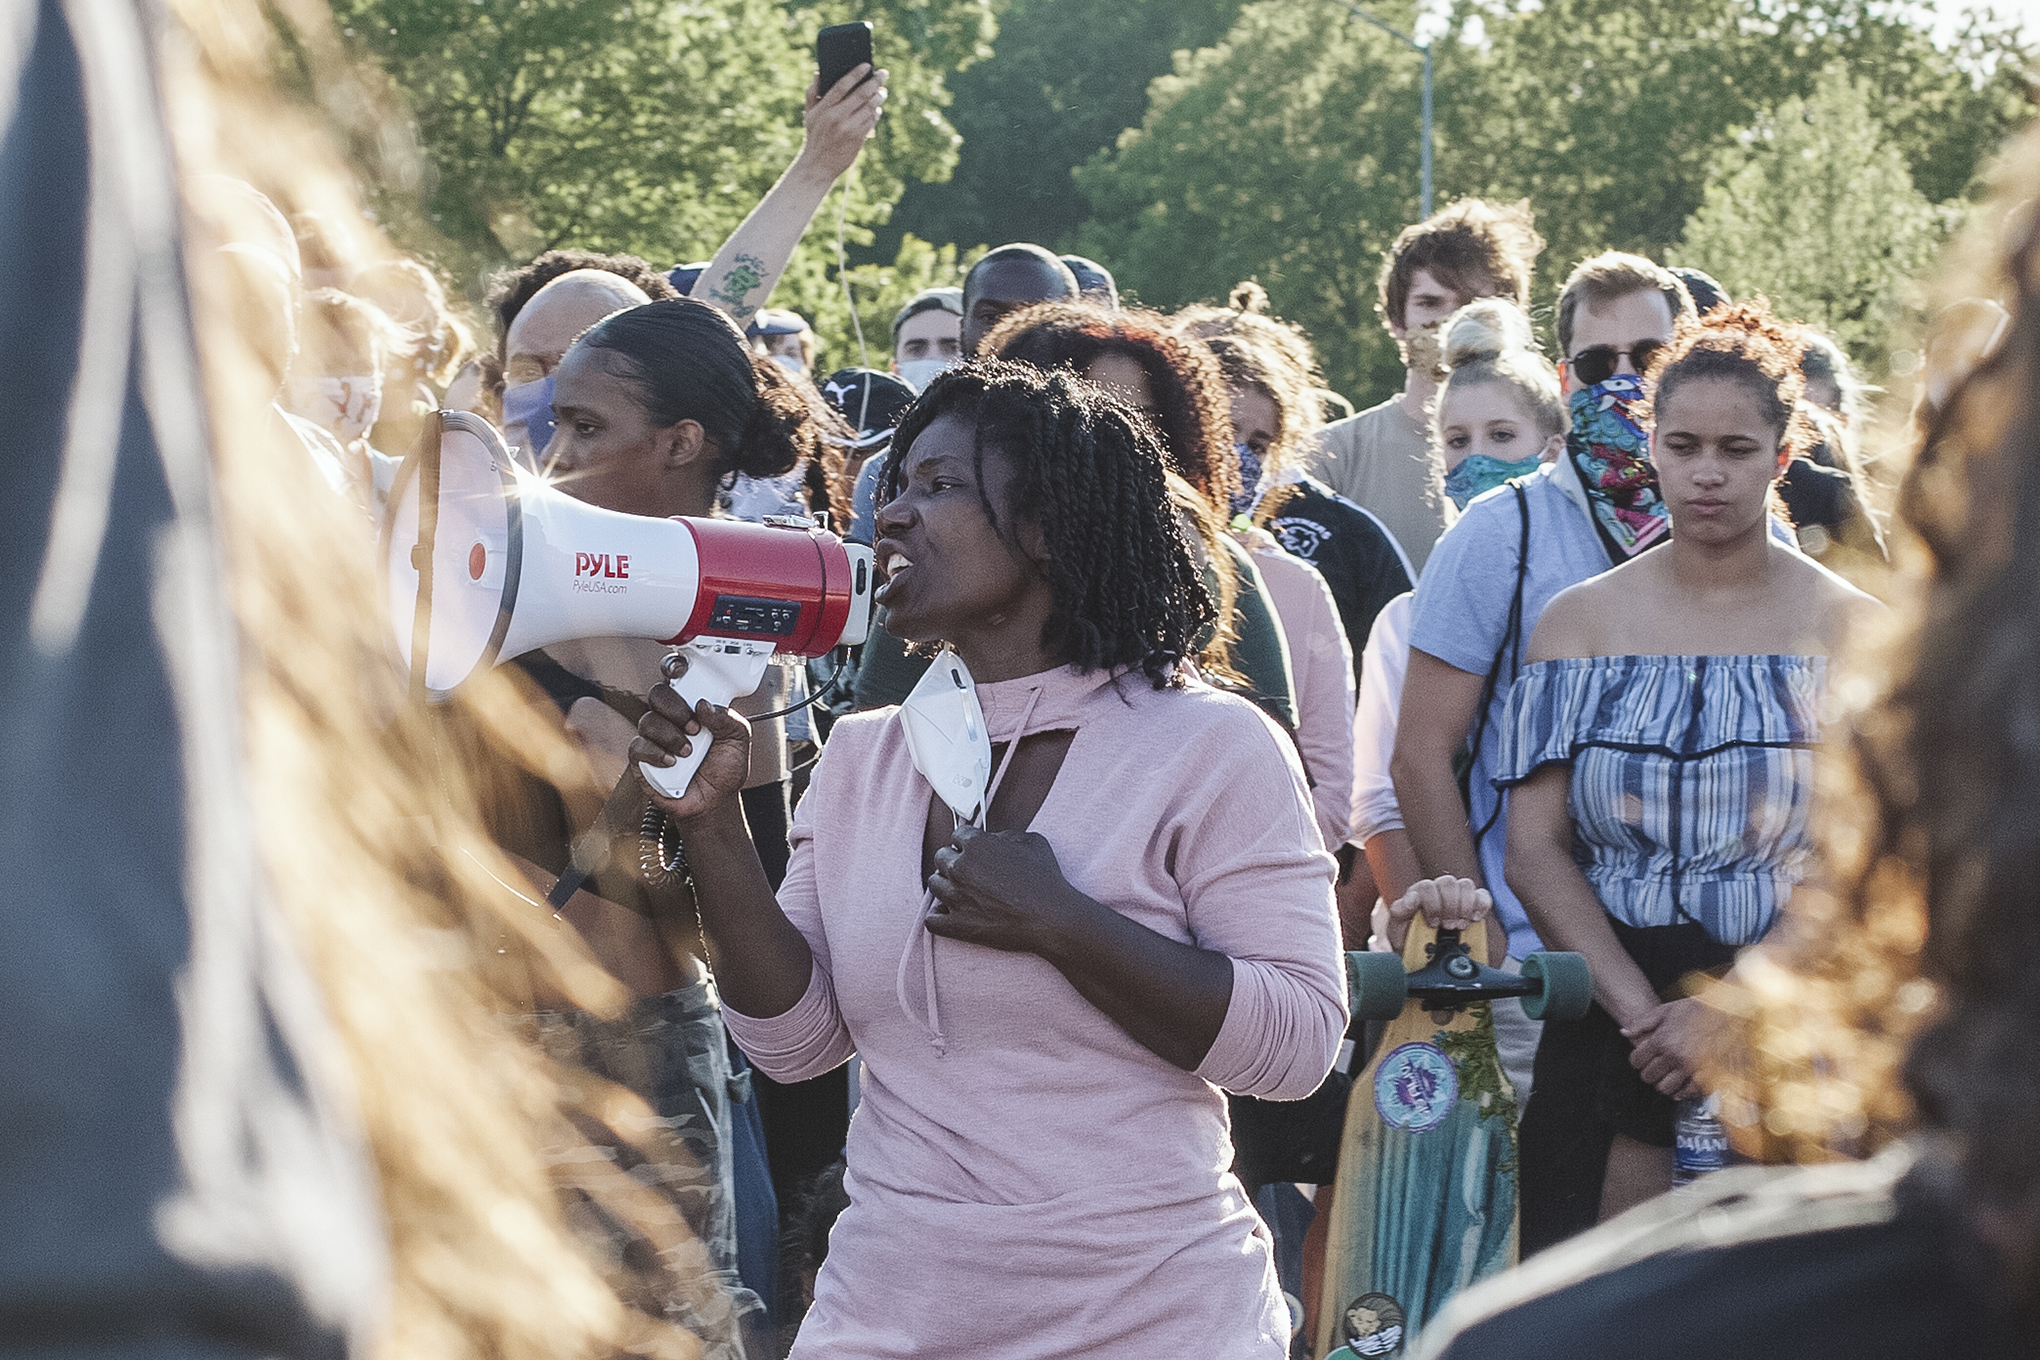 Brandi Grayson gives a speech at a protest demanding justice for George Floyd